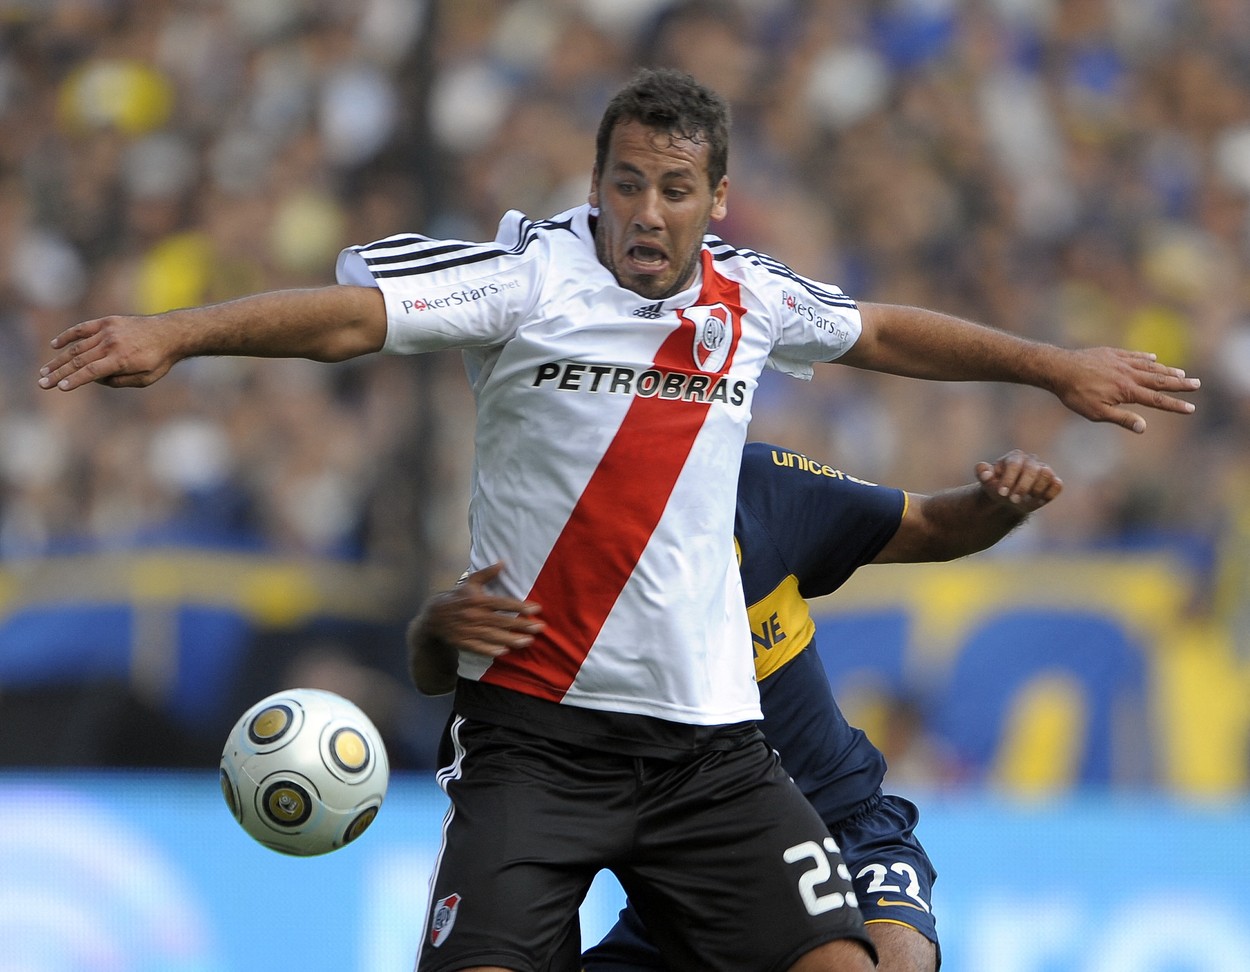 River Plate's footballer Cristian Fabbiani (front) vies for the ball with Claudio Morel Rodriguez of Boca Juniros during their Argentina first division football match, at La Bombonera stadium, in Buenos Aires, on April 19, 2009.,Image: 31170968, License: Rights-managed, Restrictions: , Model Release: no